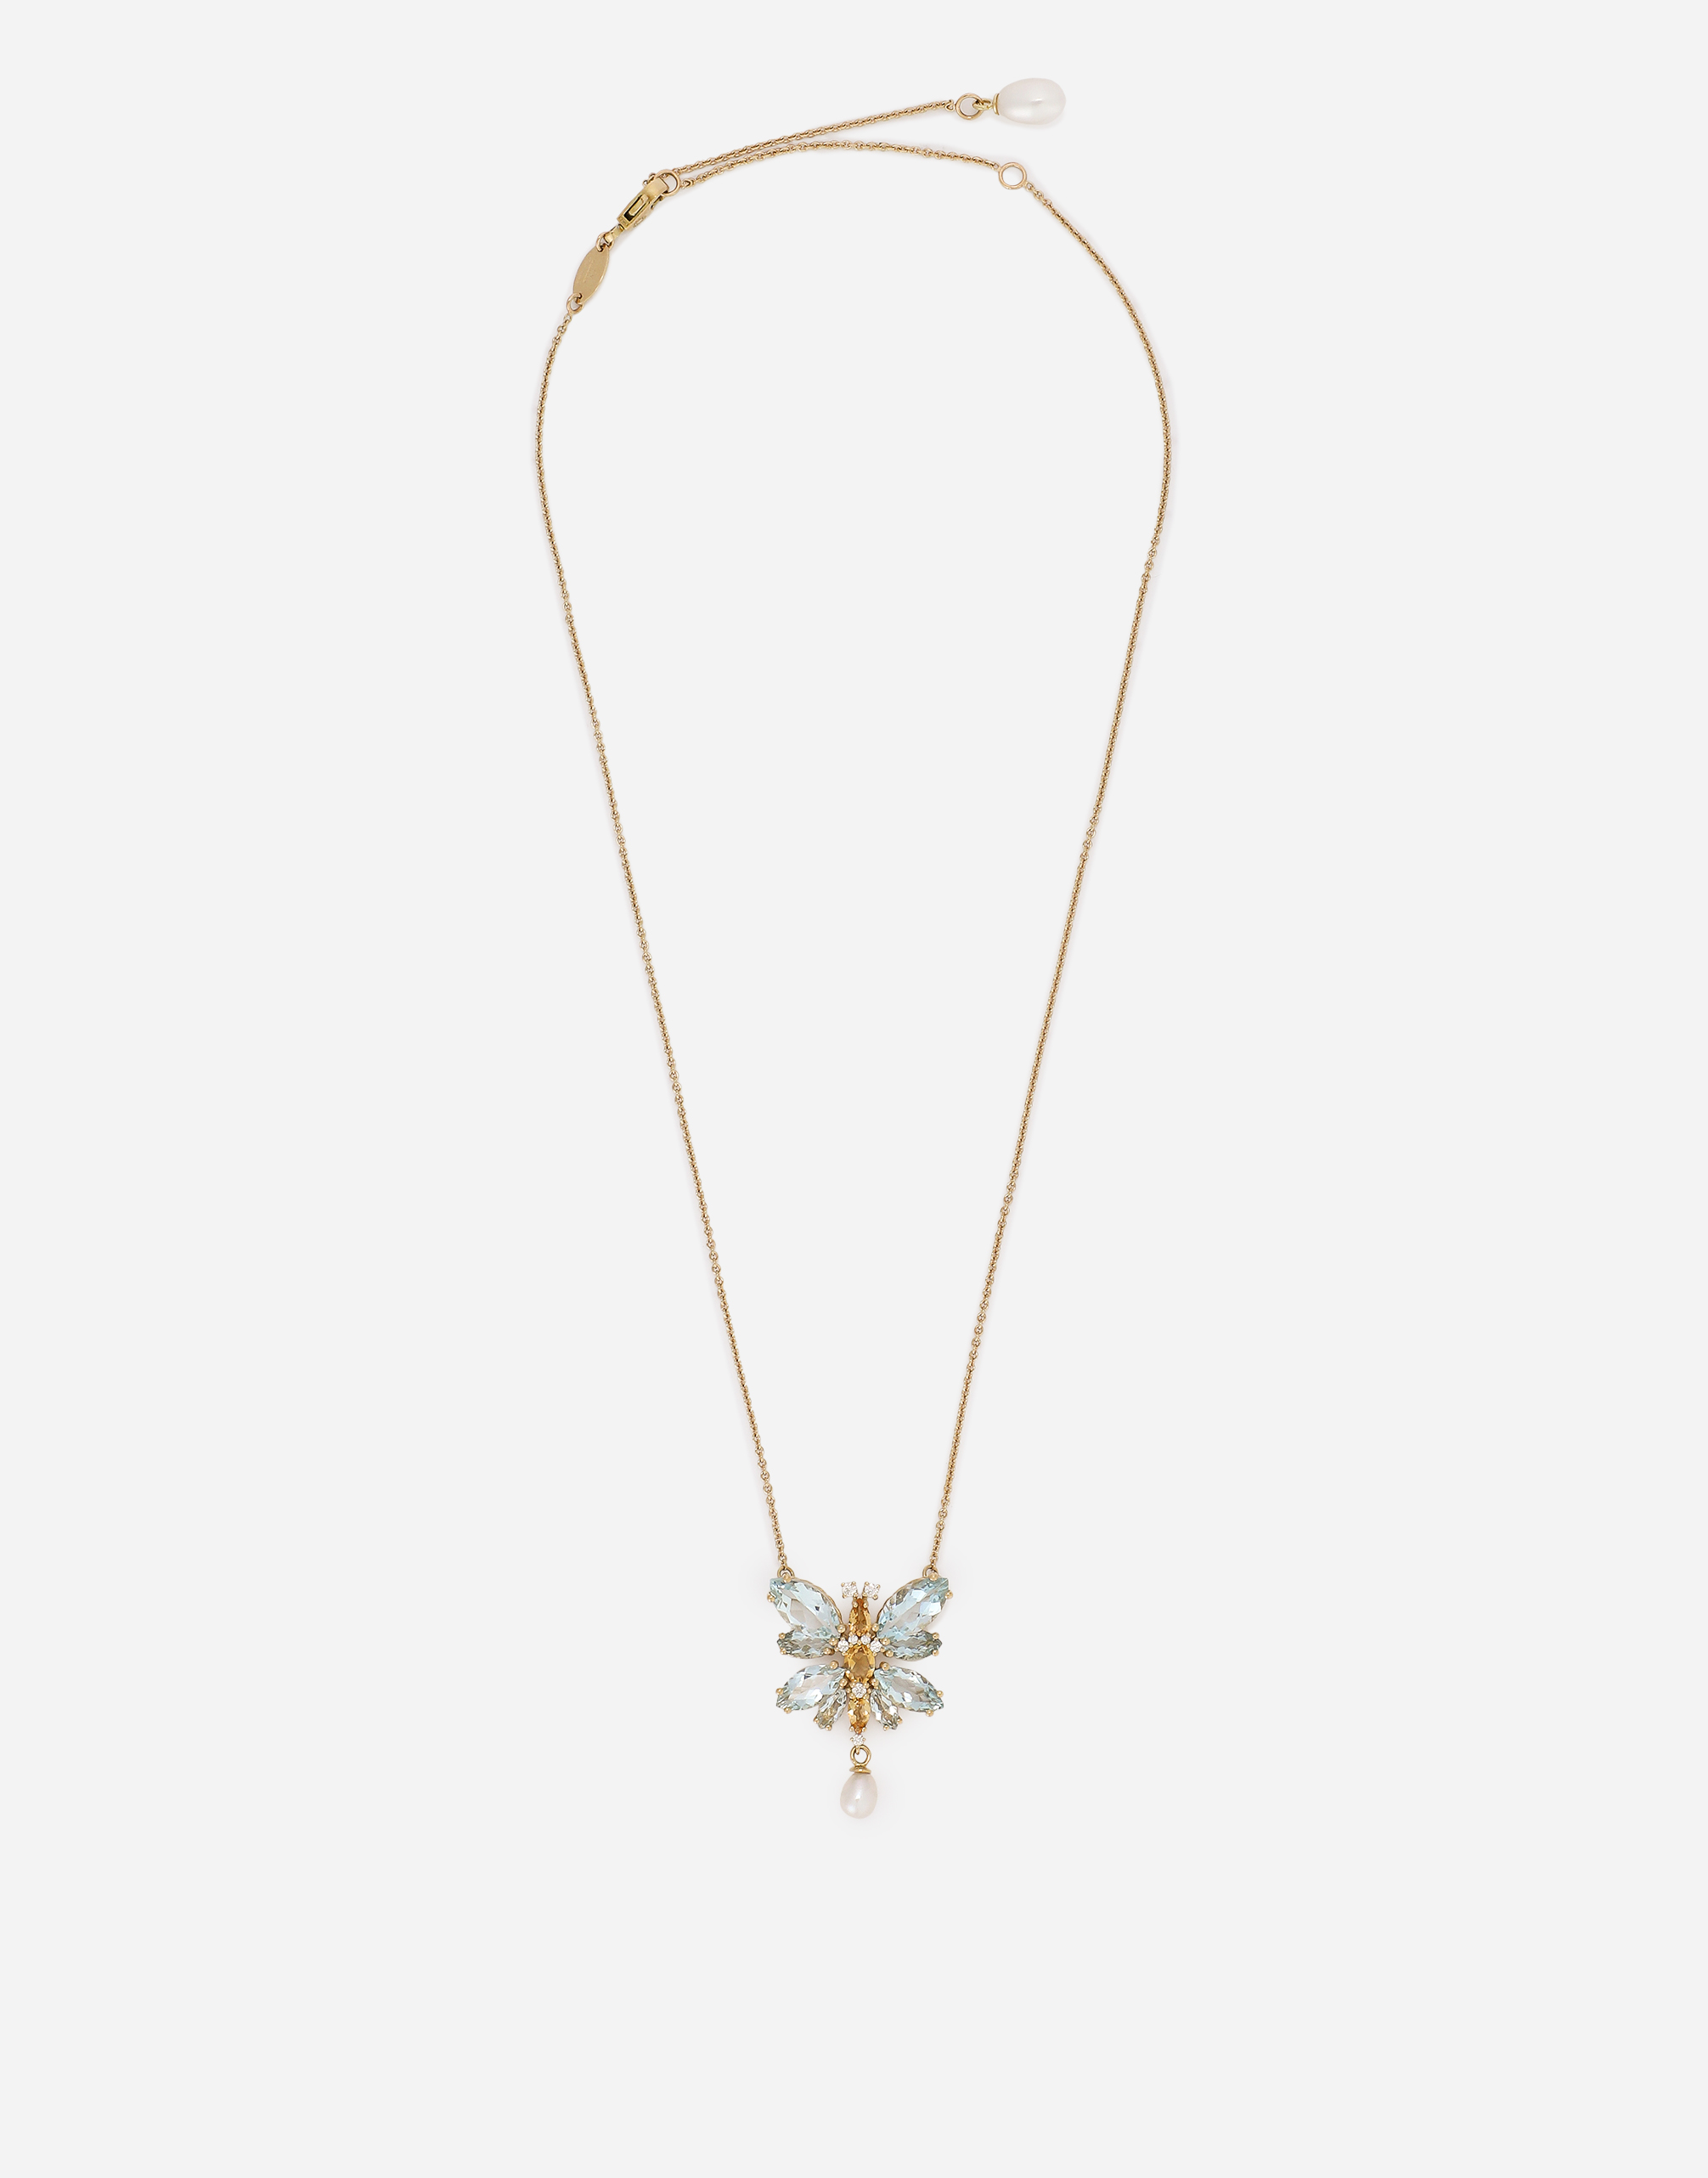 Spring necklace in yellow 18kt gold with aquamarine butterfly in Gold